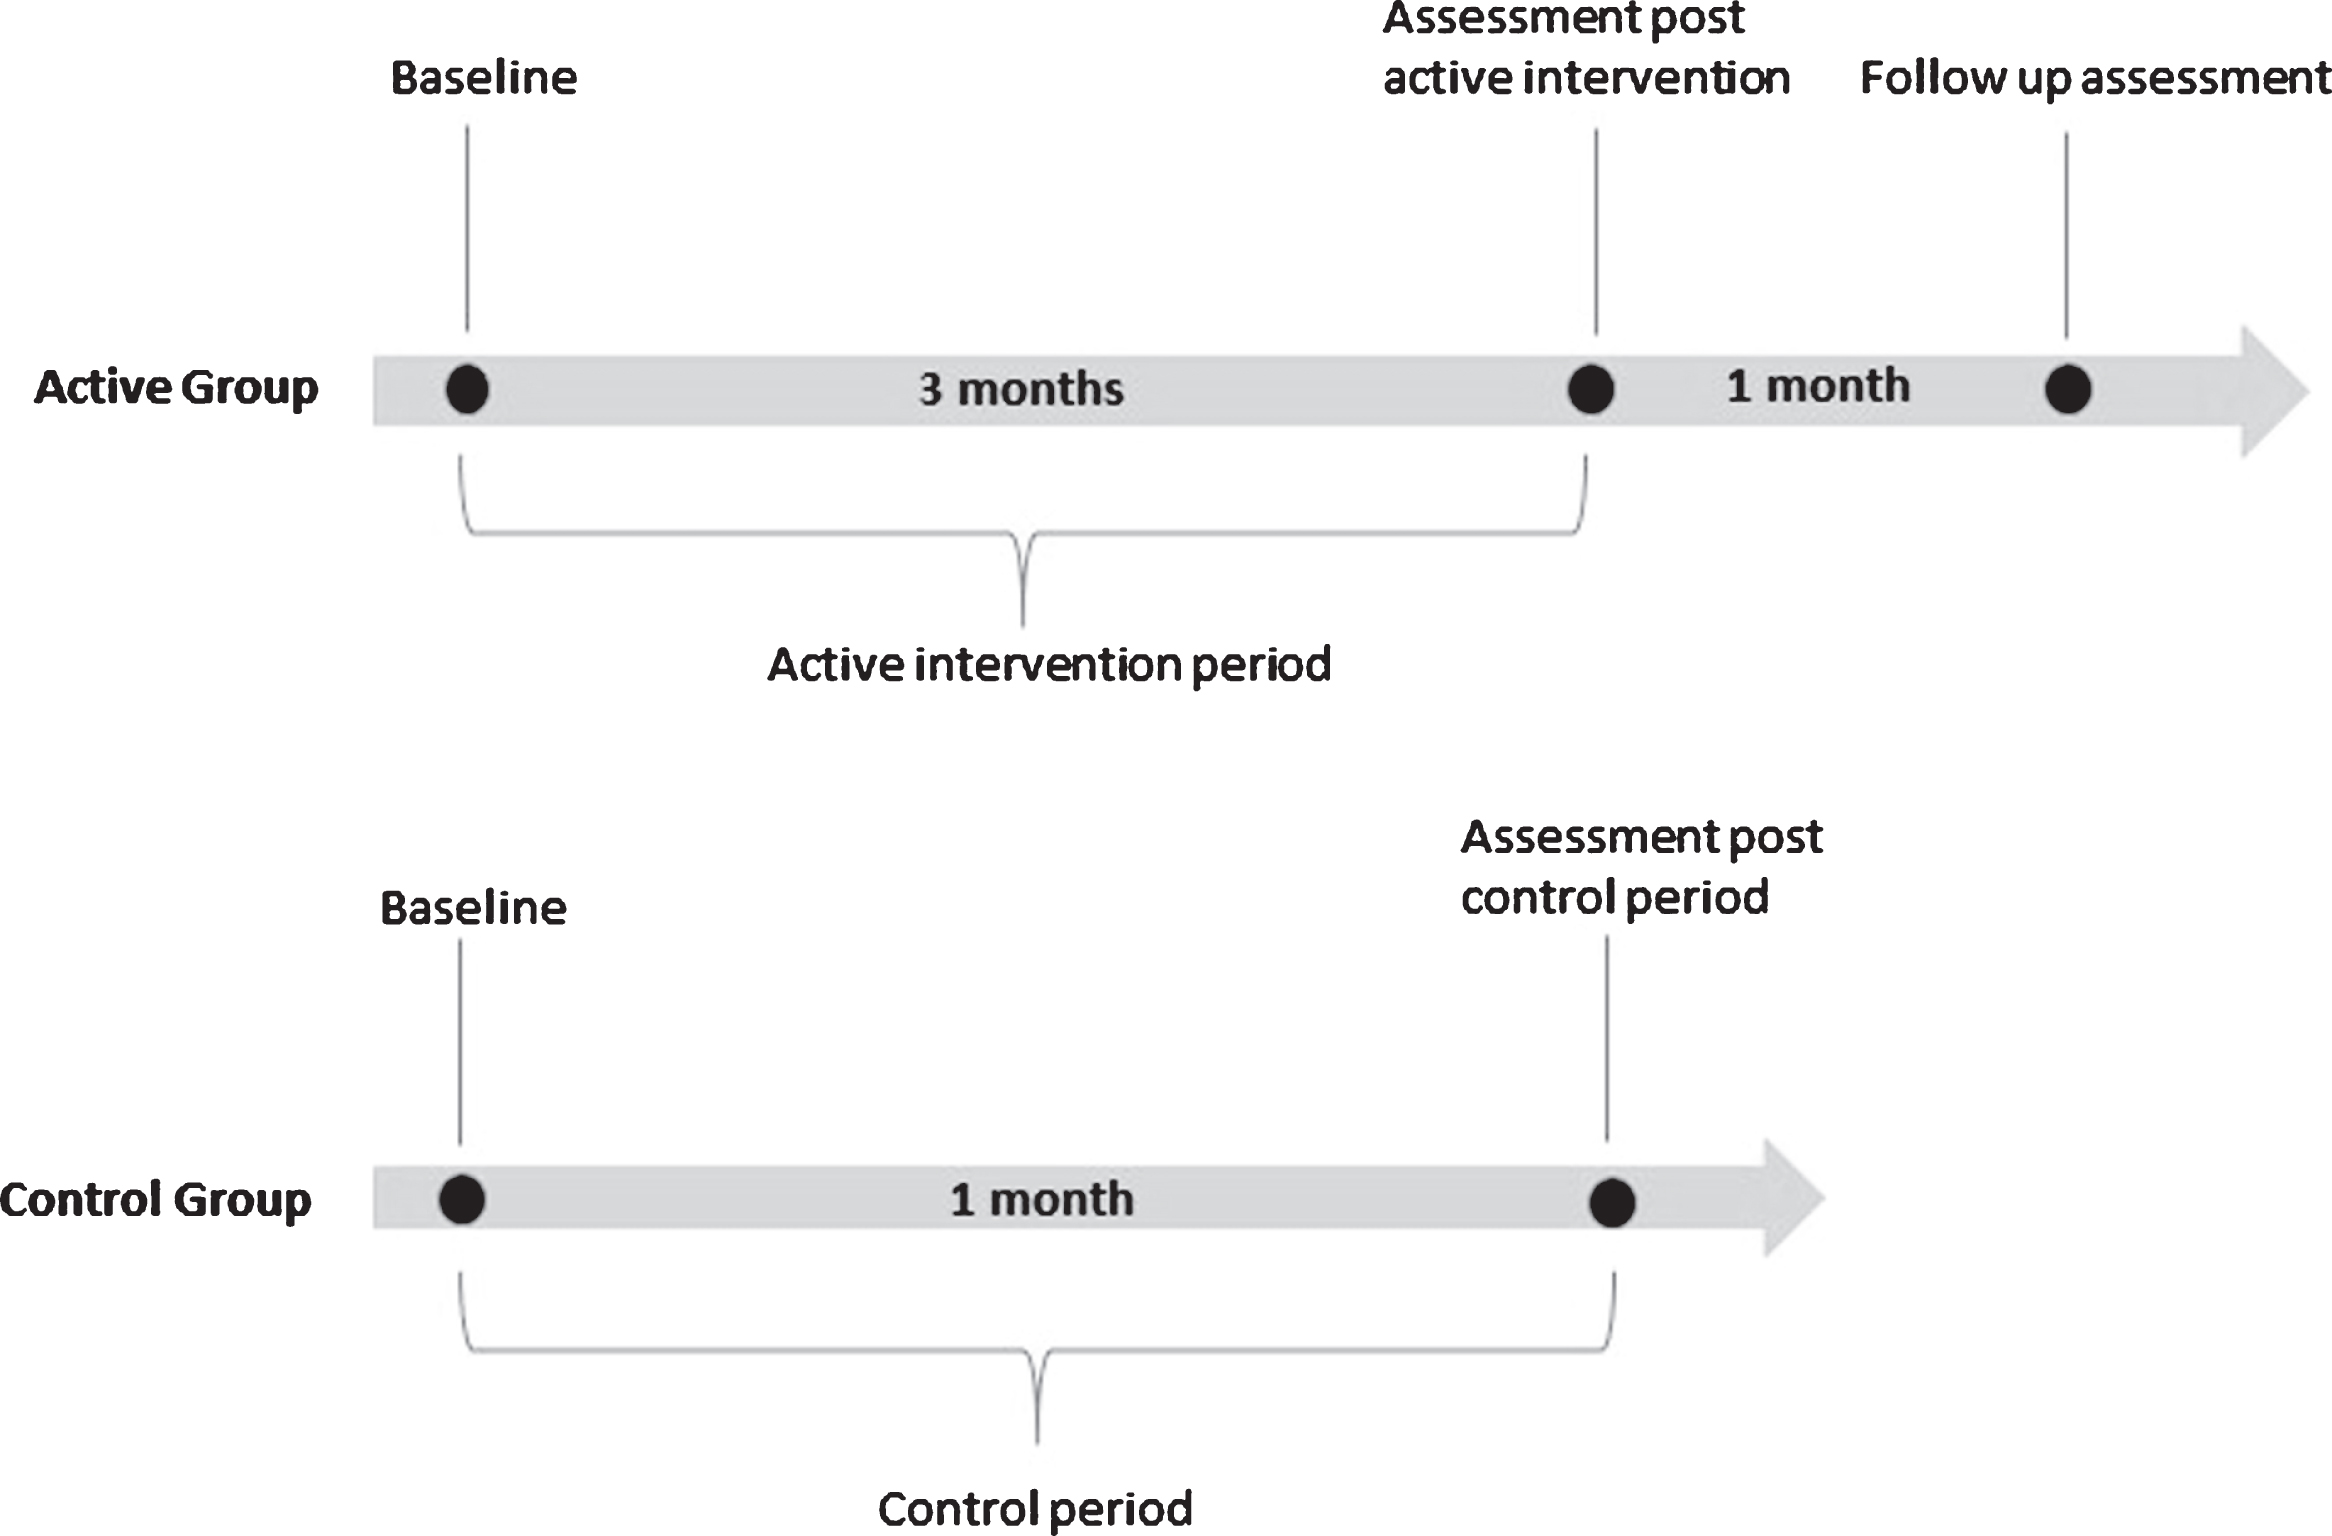 The Active group was assessed three times: (1) baseline assessment prior to the 12-week active intervention; (2) immediately following the intervention; and (3) one month after finishing the intervention. The Control group was assessed 2 times: (1) baseline assessment prior to the 4-week control period; (2) immediately after the control period.